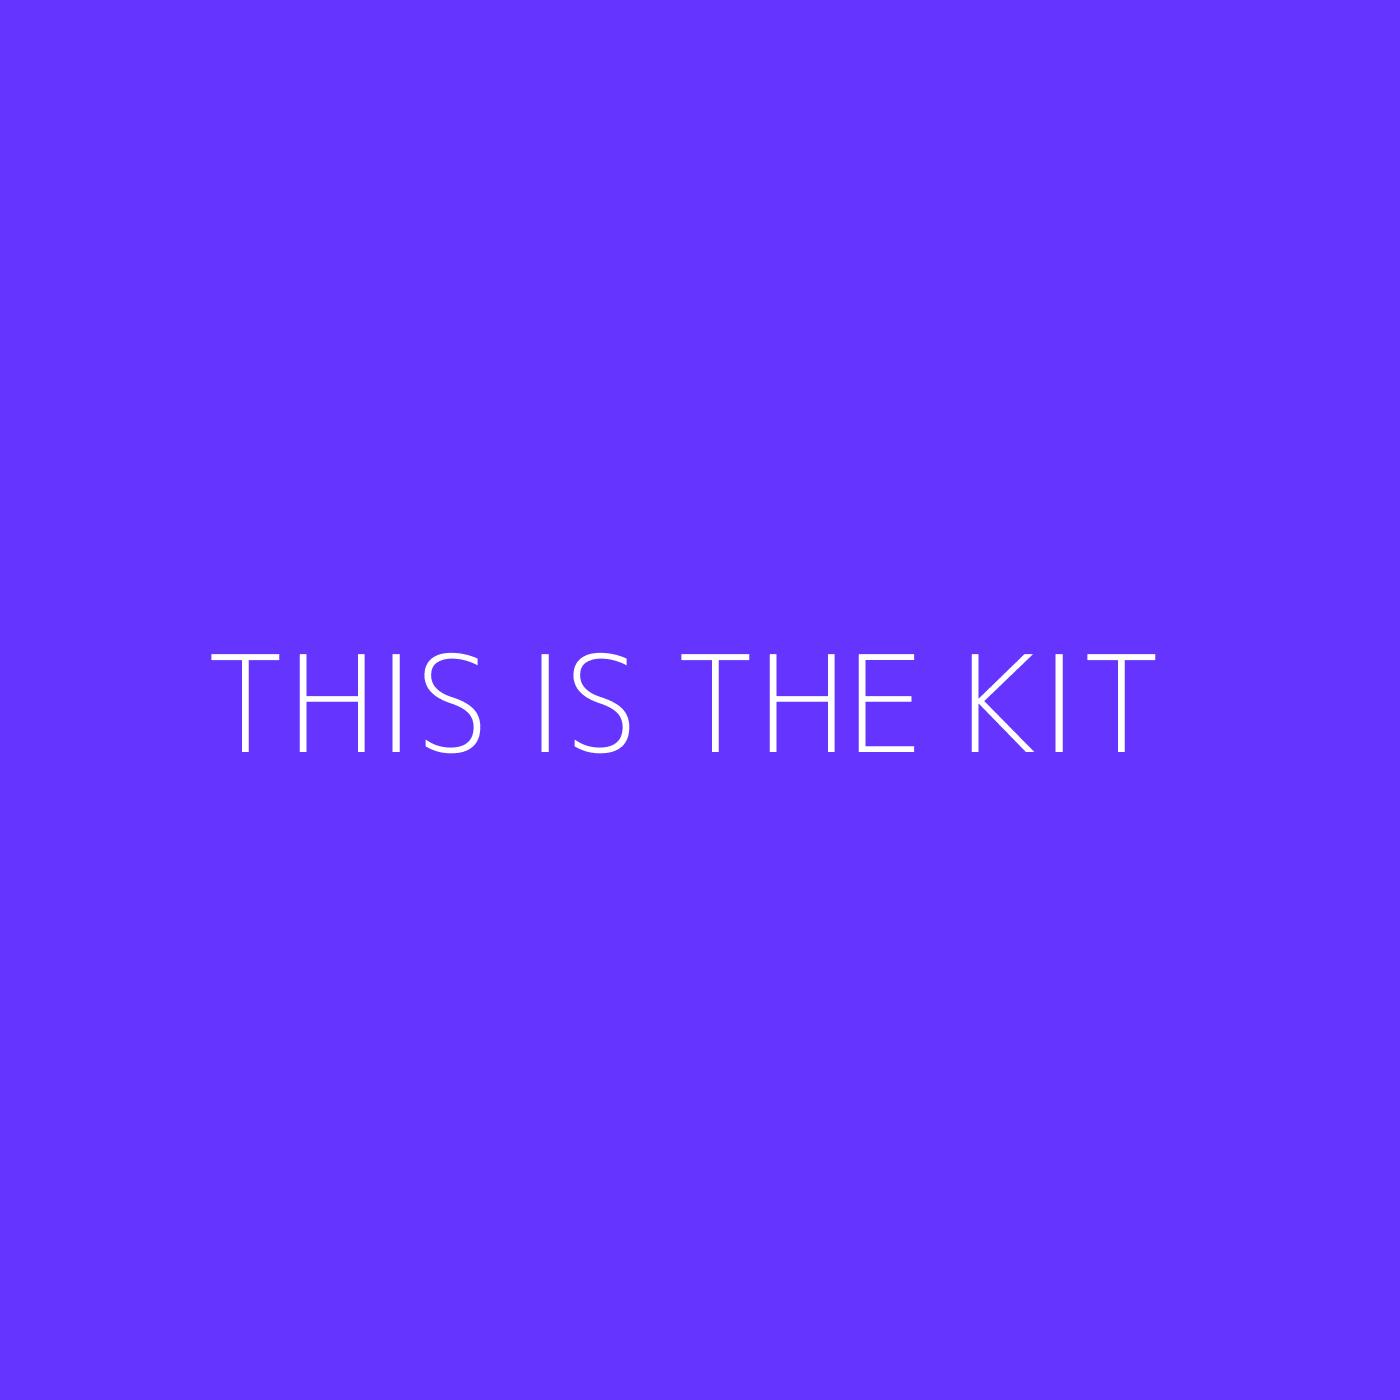 This Is The Kit Playlist Artwork